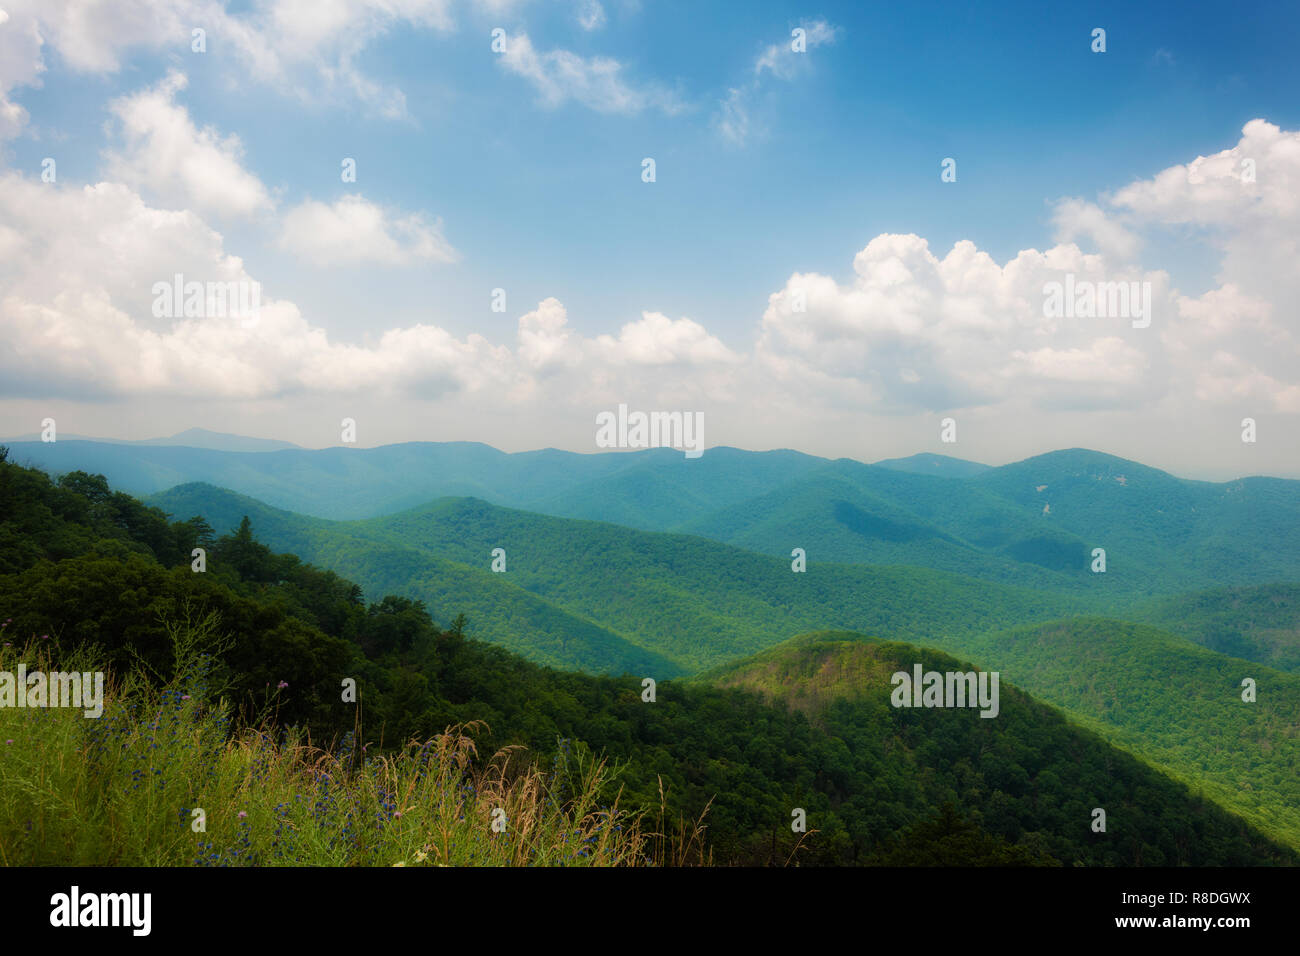 Shenandoah National Park in Virginia runs along the Blue Ridge Mountains in southeastern united states. Stock Photo